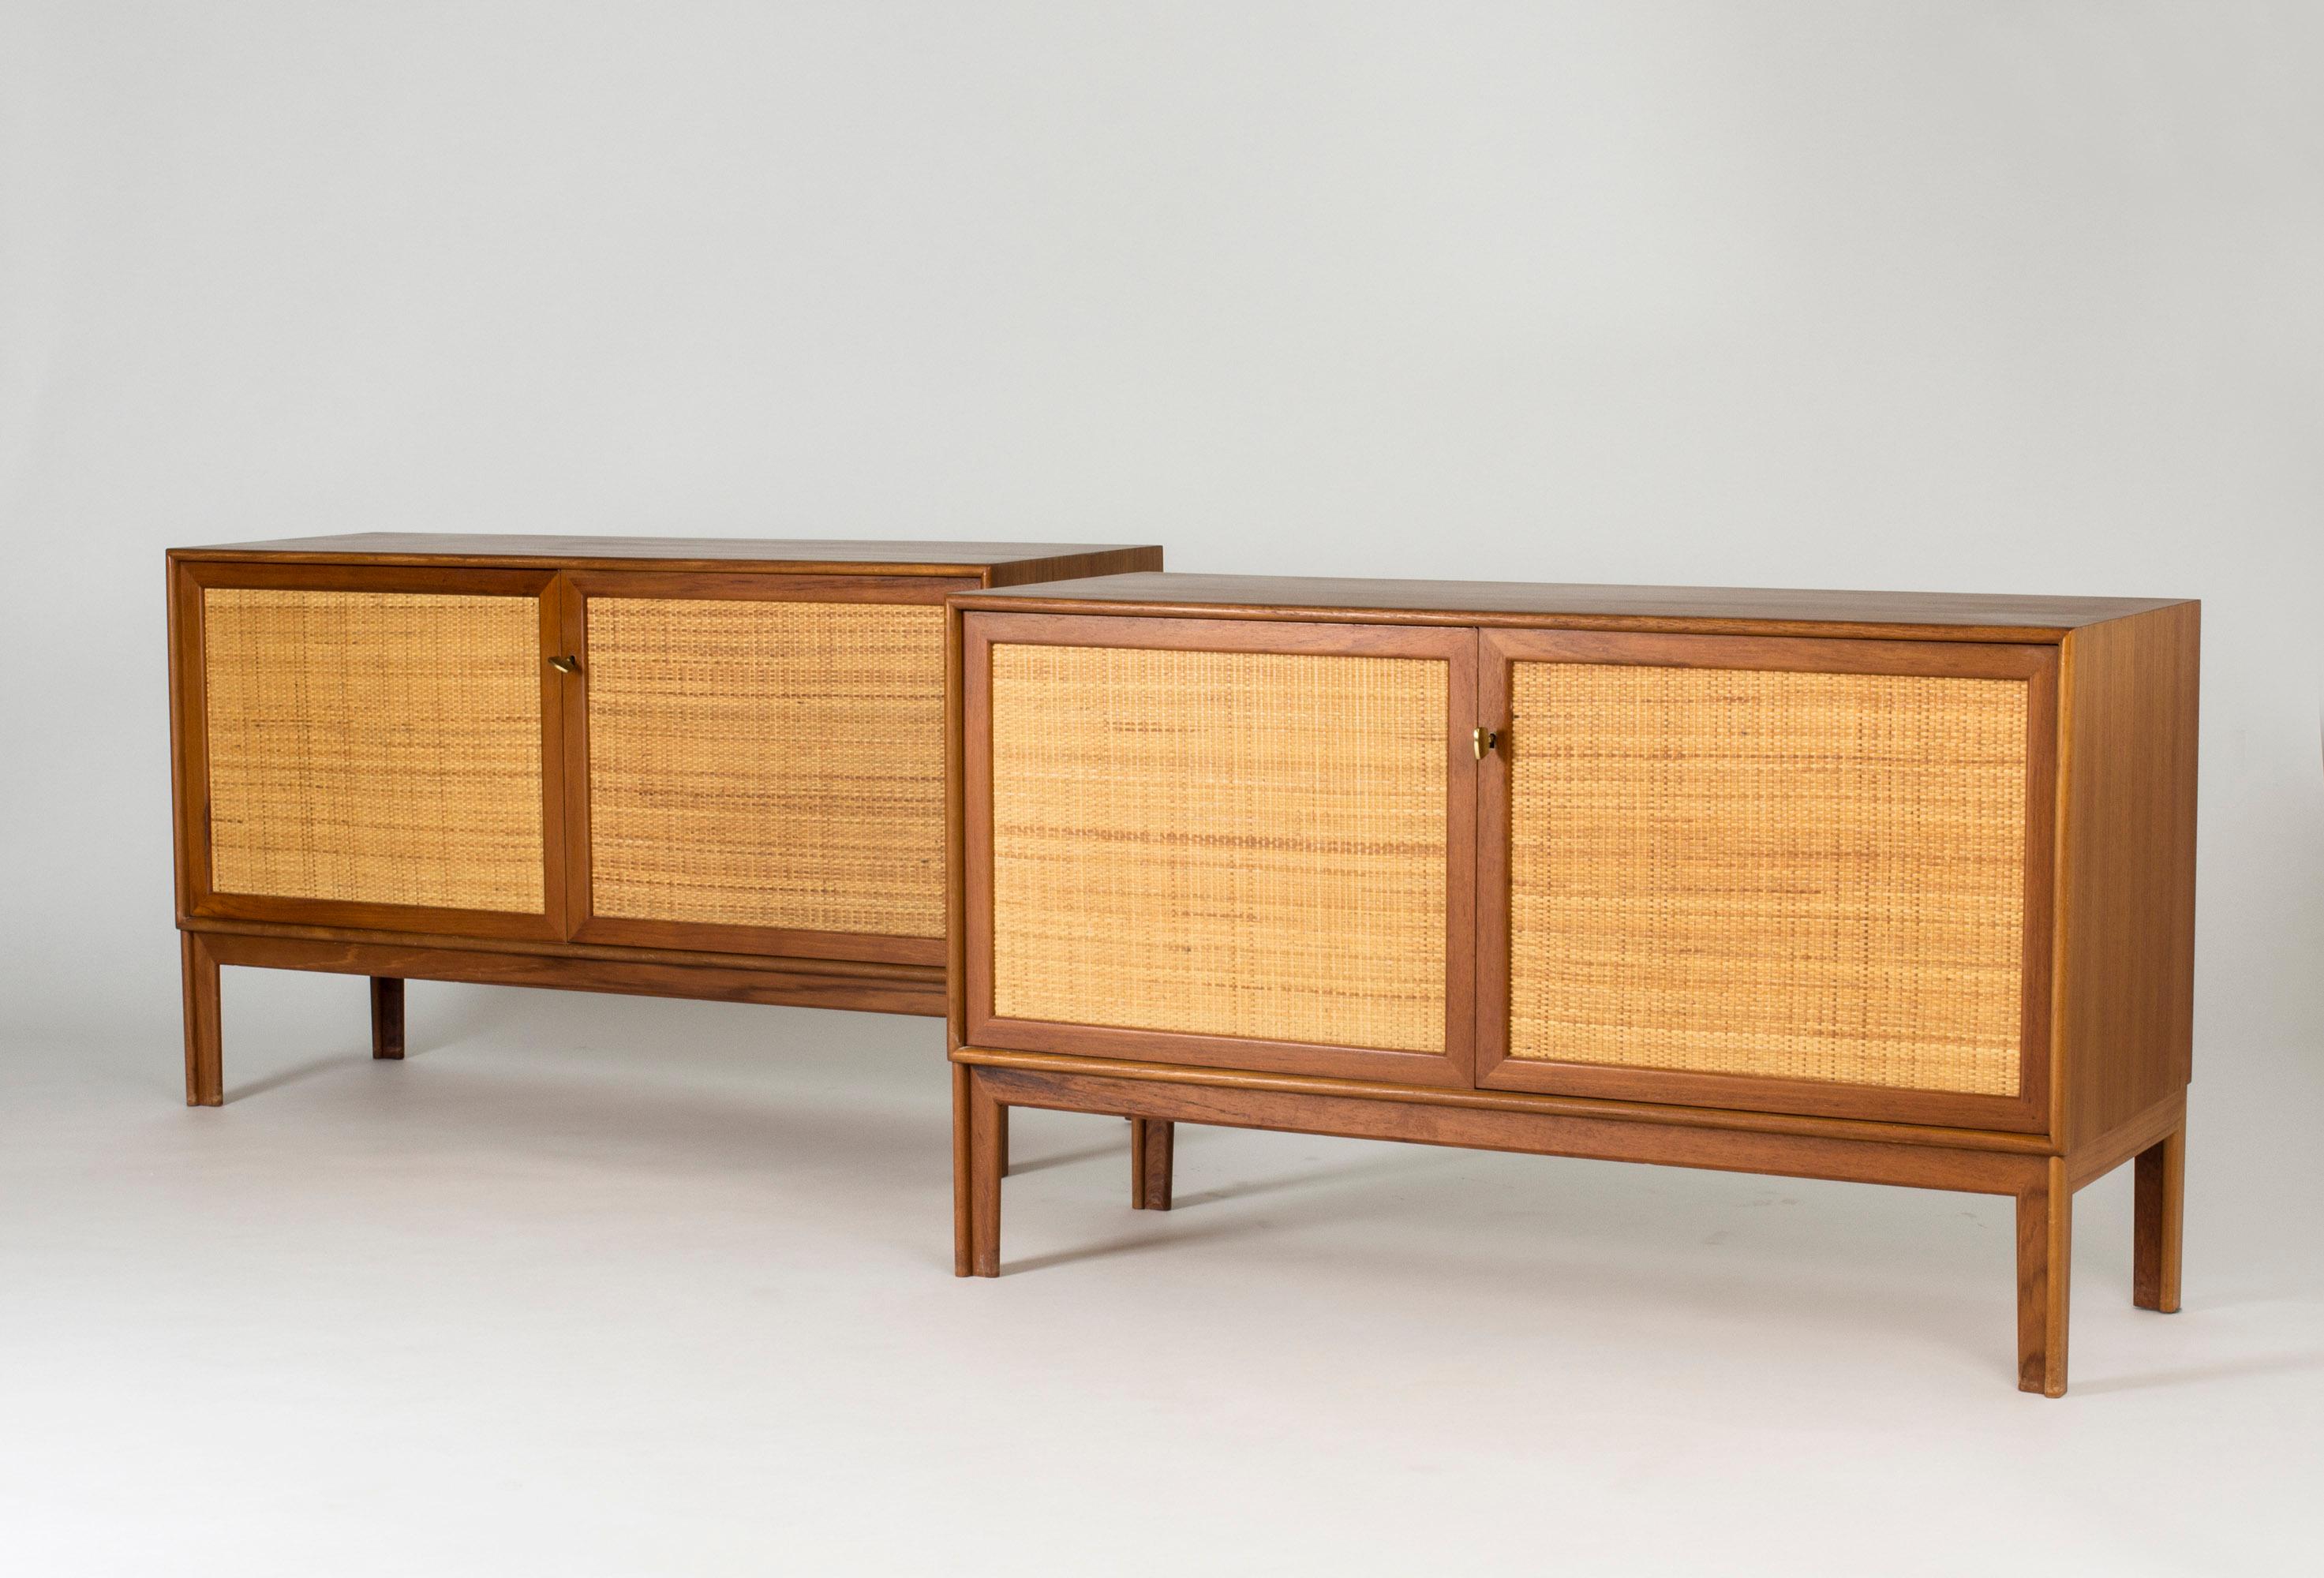 Pair of teak sideboards with beautiful rattan fronts, designed by Alf Svensson for Bjästa. Two shelves inside each sideboard separated by a wall in the center. Cool, large brass keys and nicely sculpted legs. Beautiful material combination.